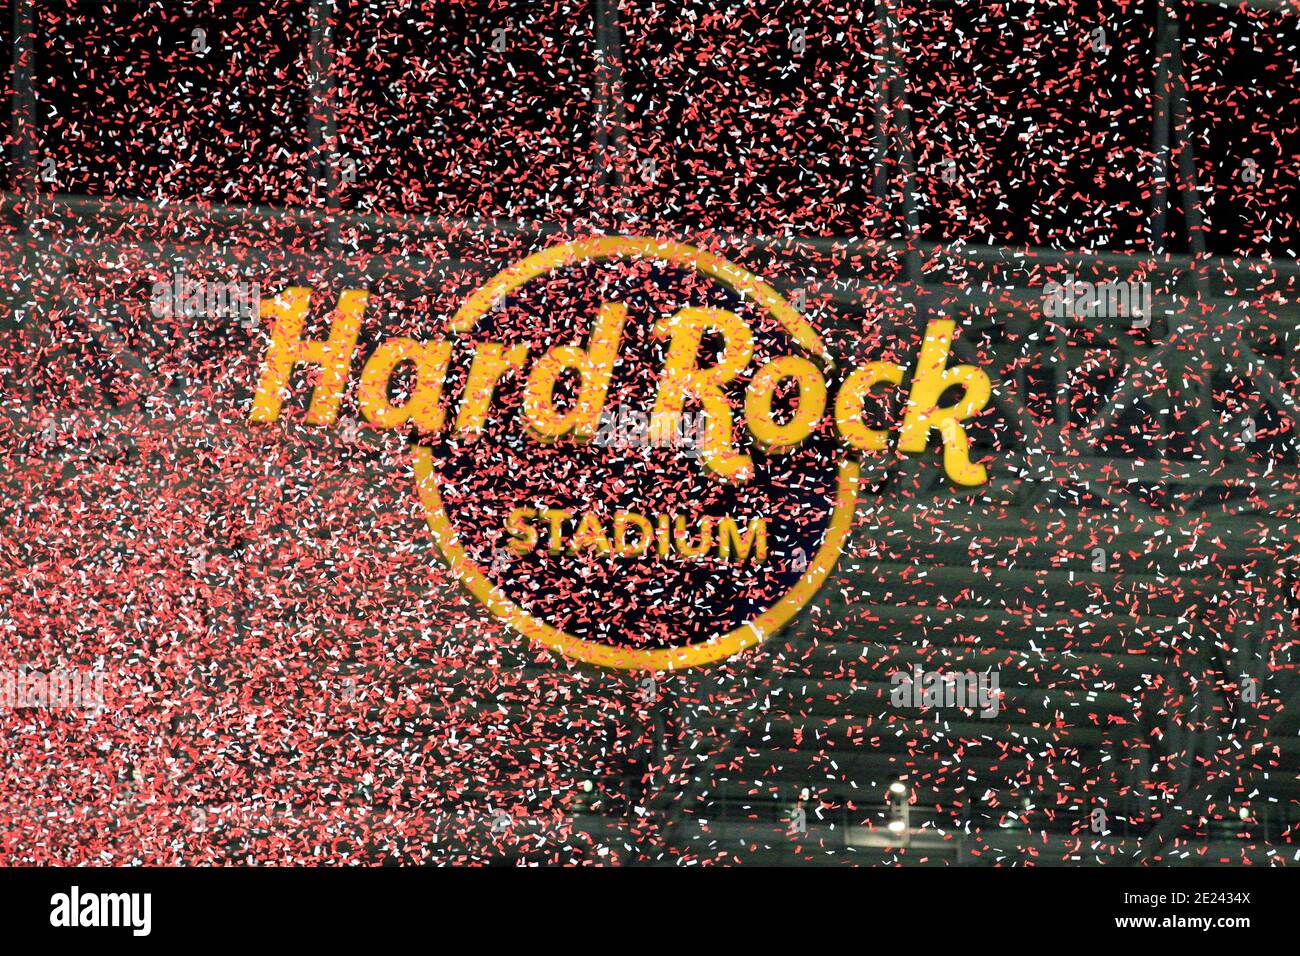 214 Field View Of Hard Rock Stadium Stock Photos, High-Res Pictures, and  Images - Getty Images